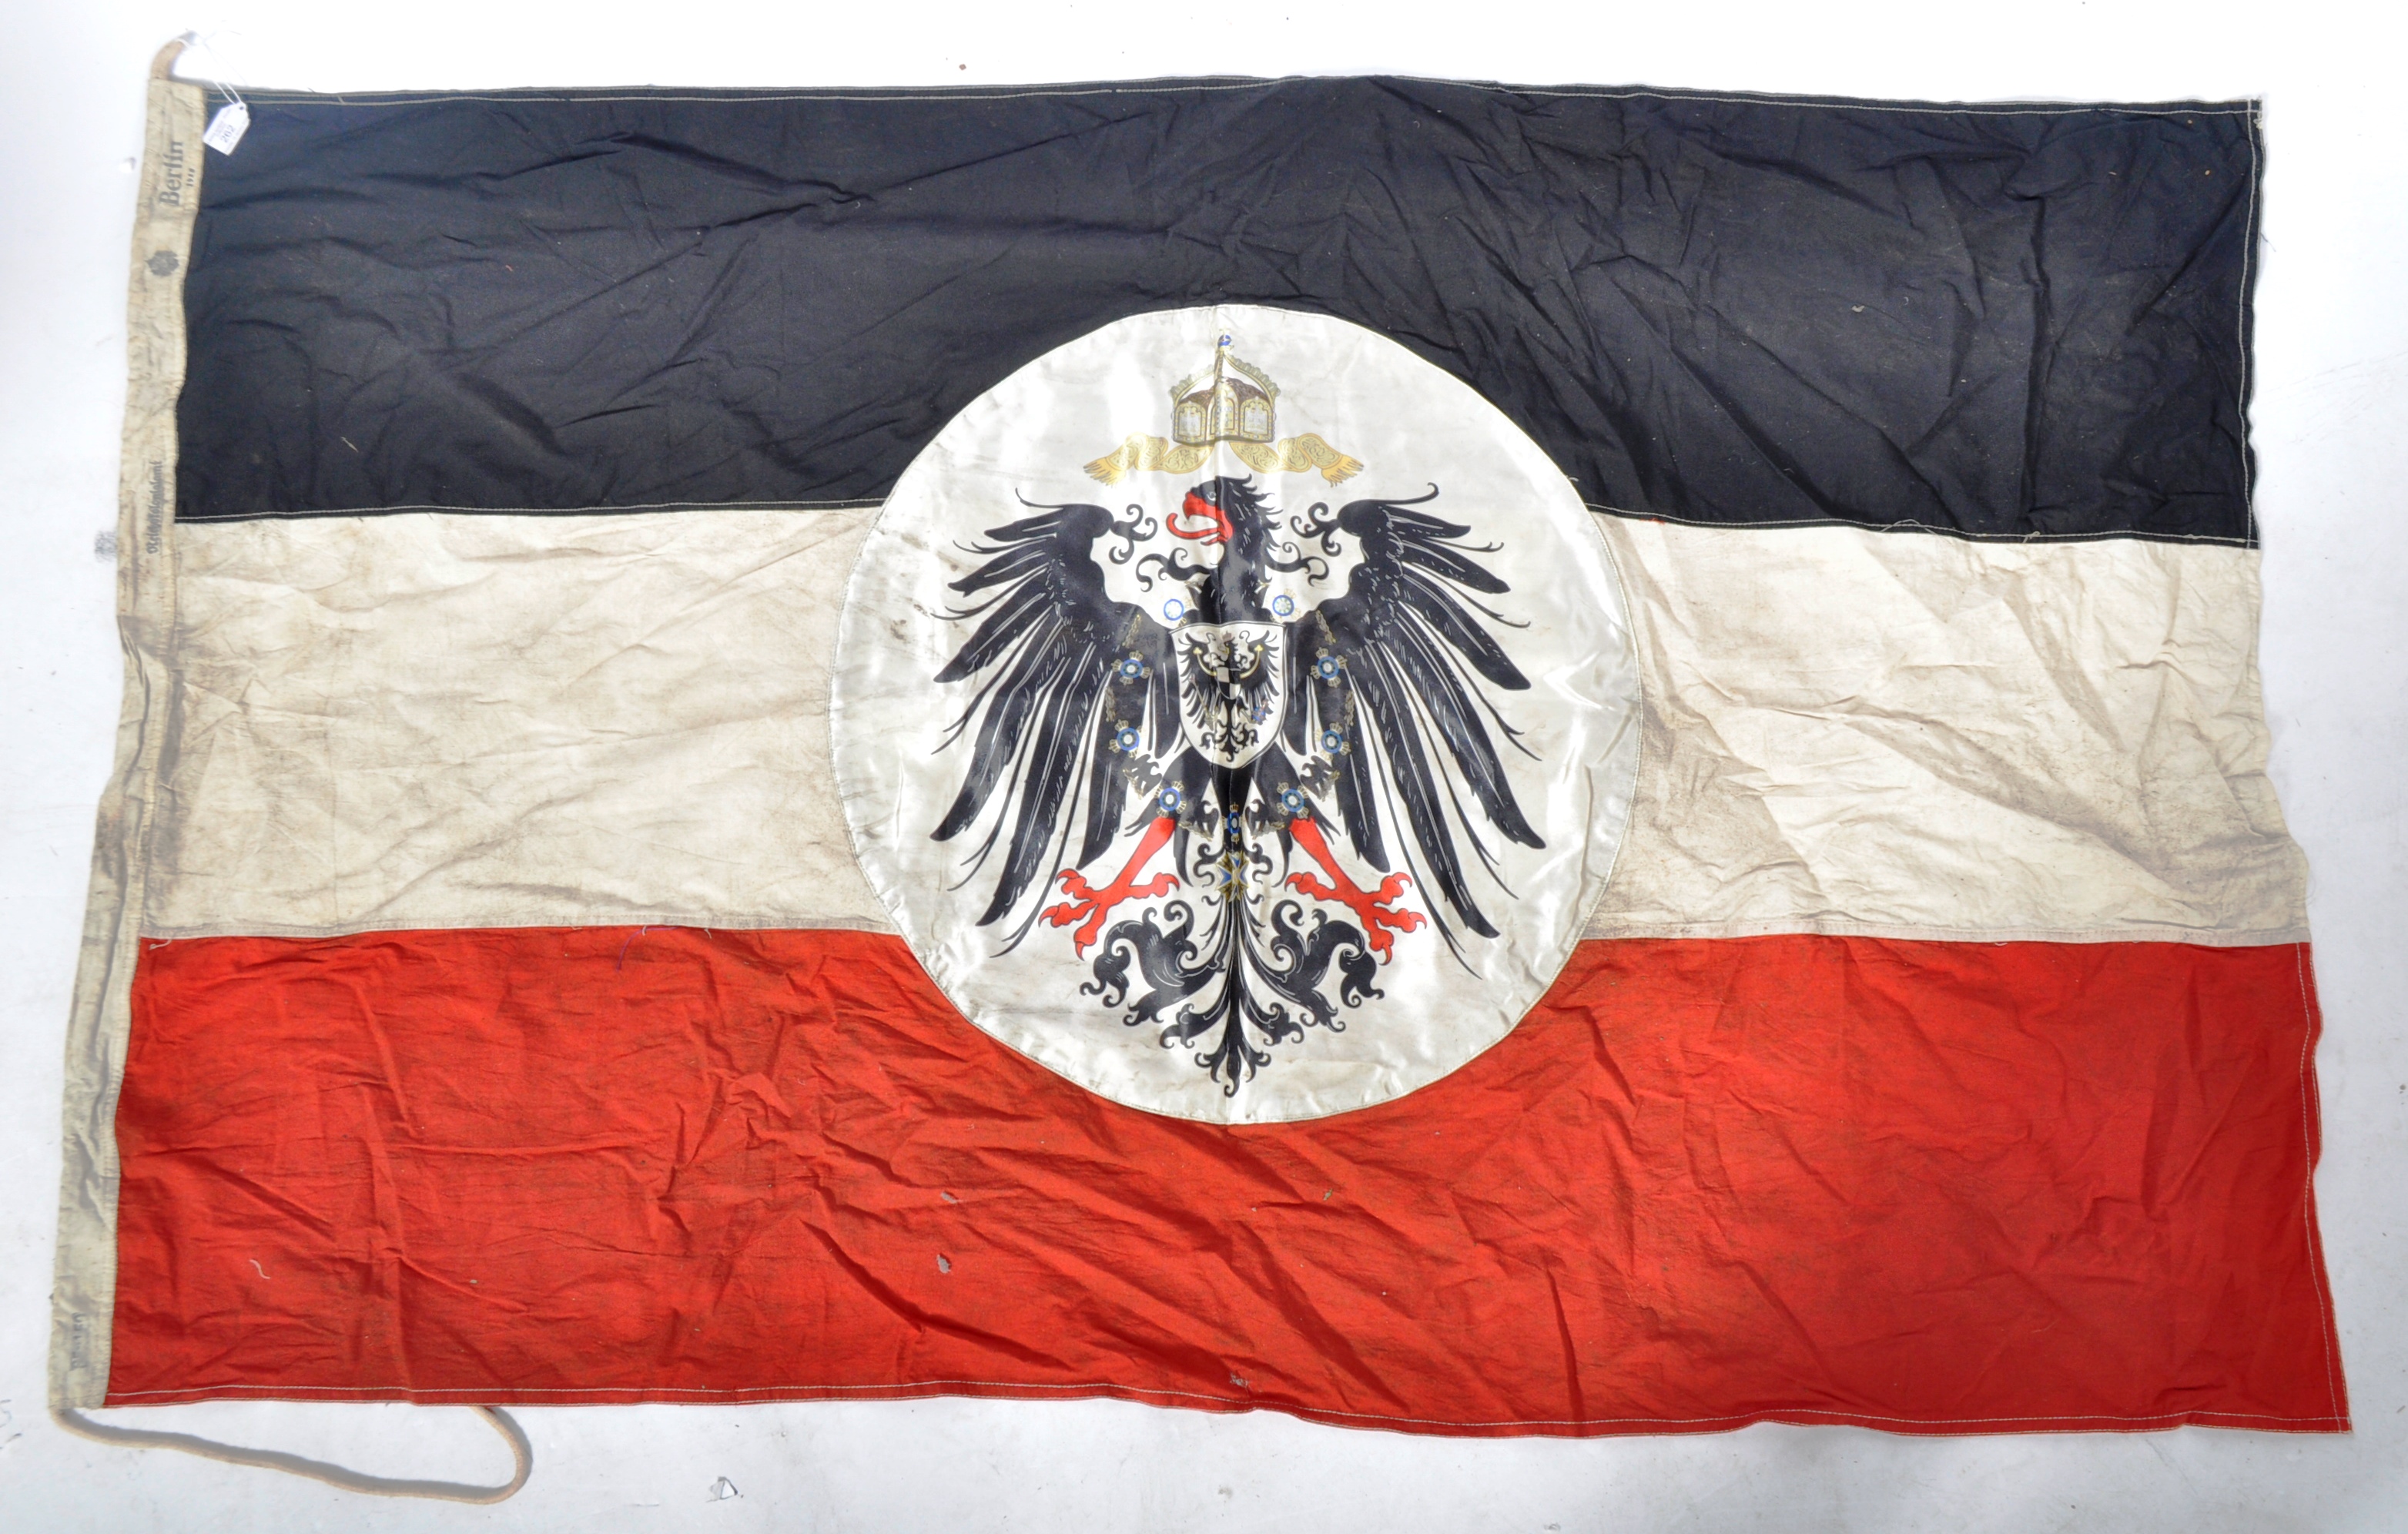 WWI INTEREST - LARGE GERMAN COLONIAL FLAG WITH KAISER EMBLEM